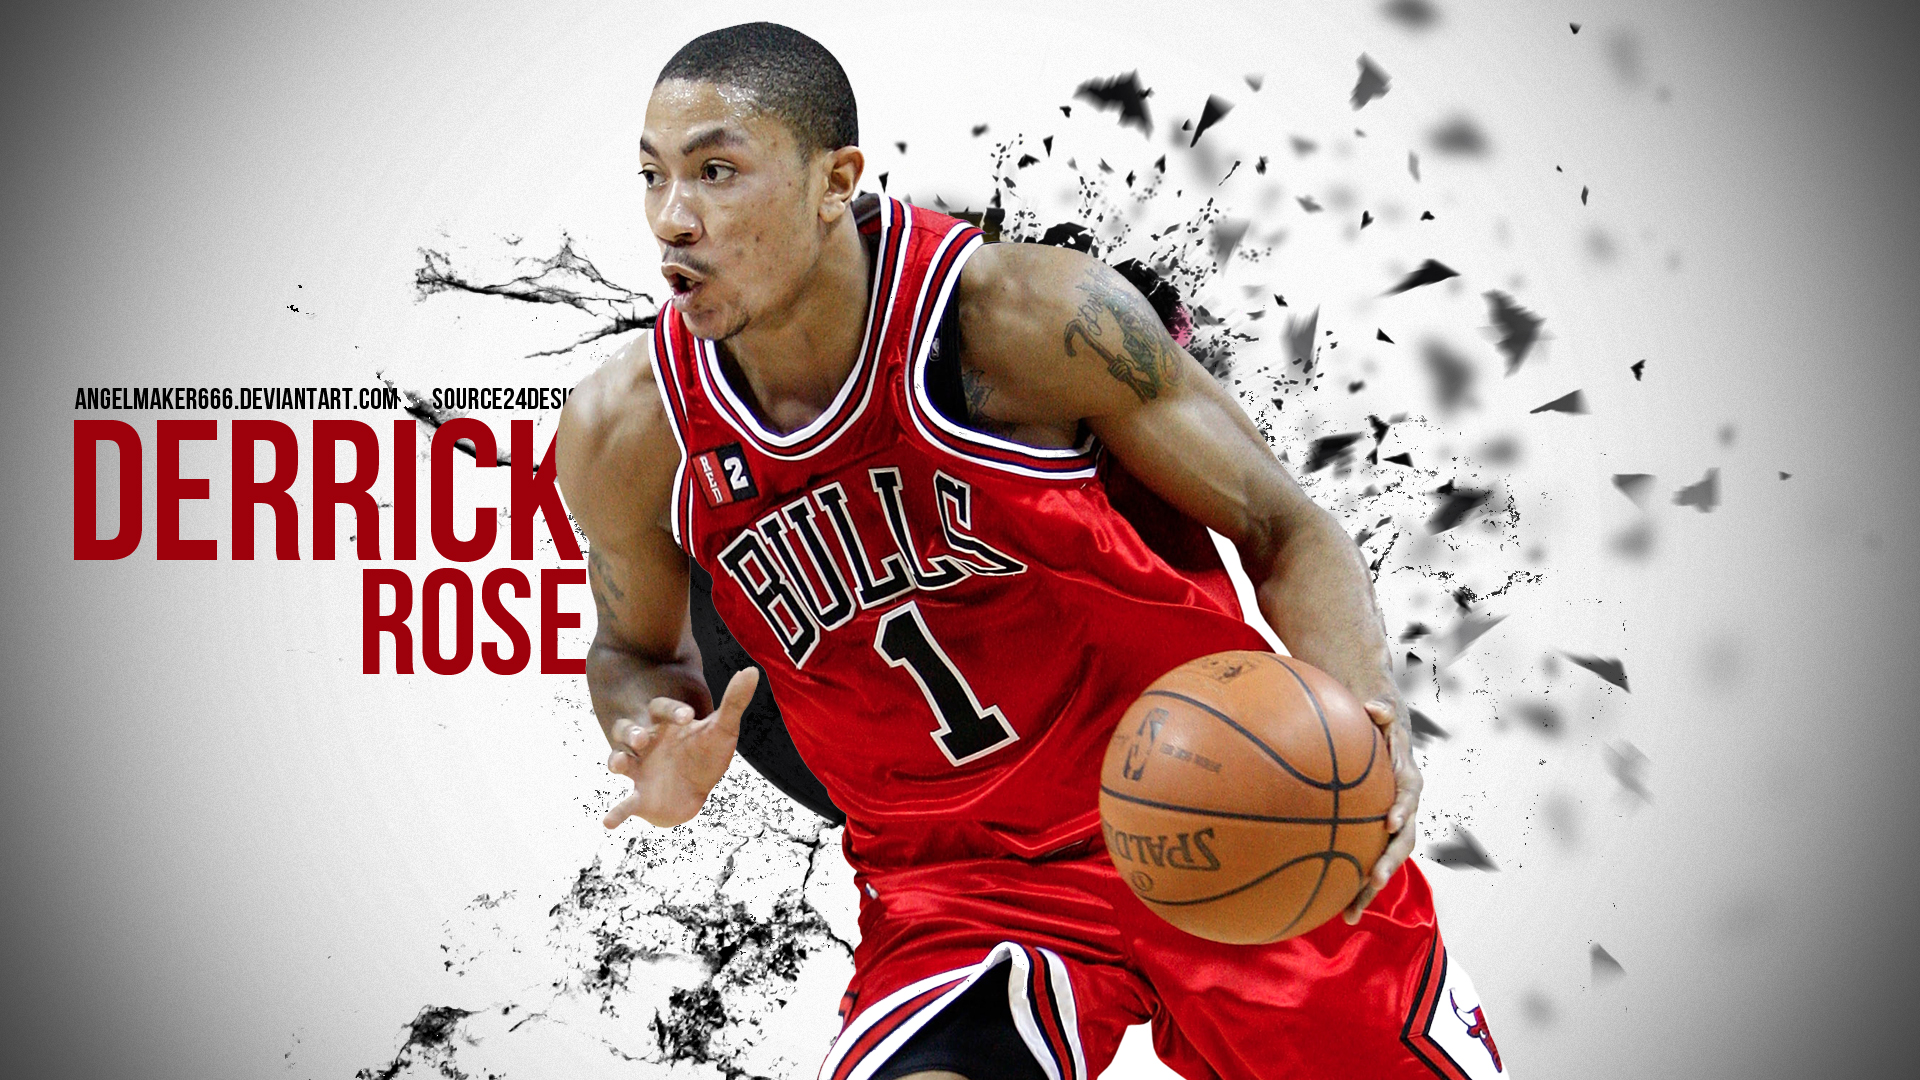 Derrick Rose's Top 10 Plays With The Bulls 